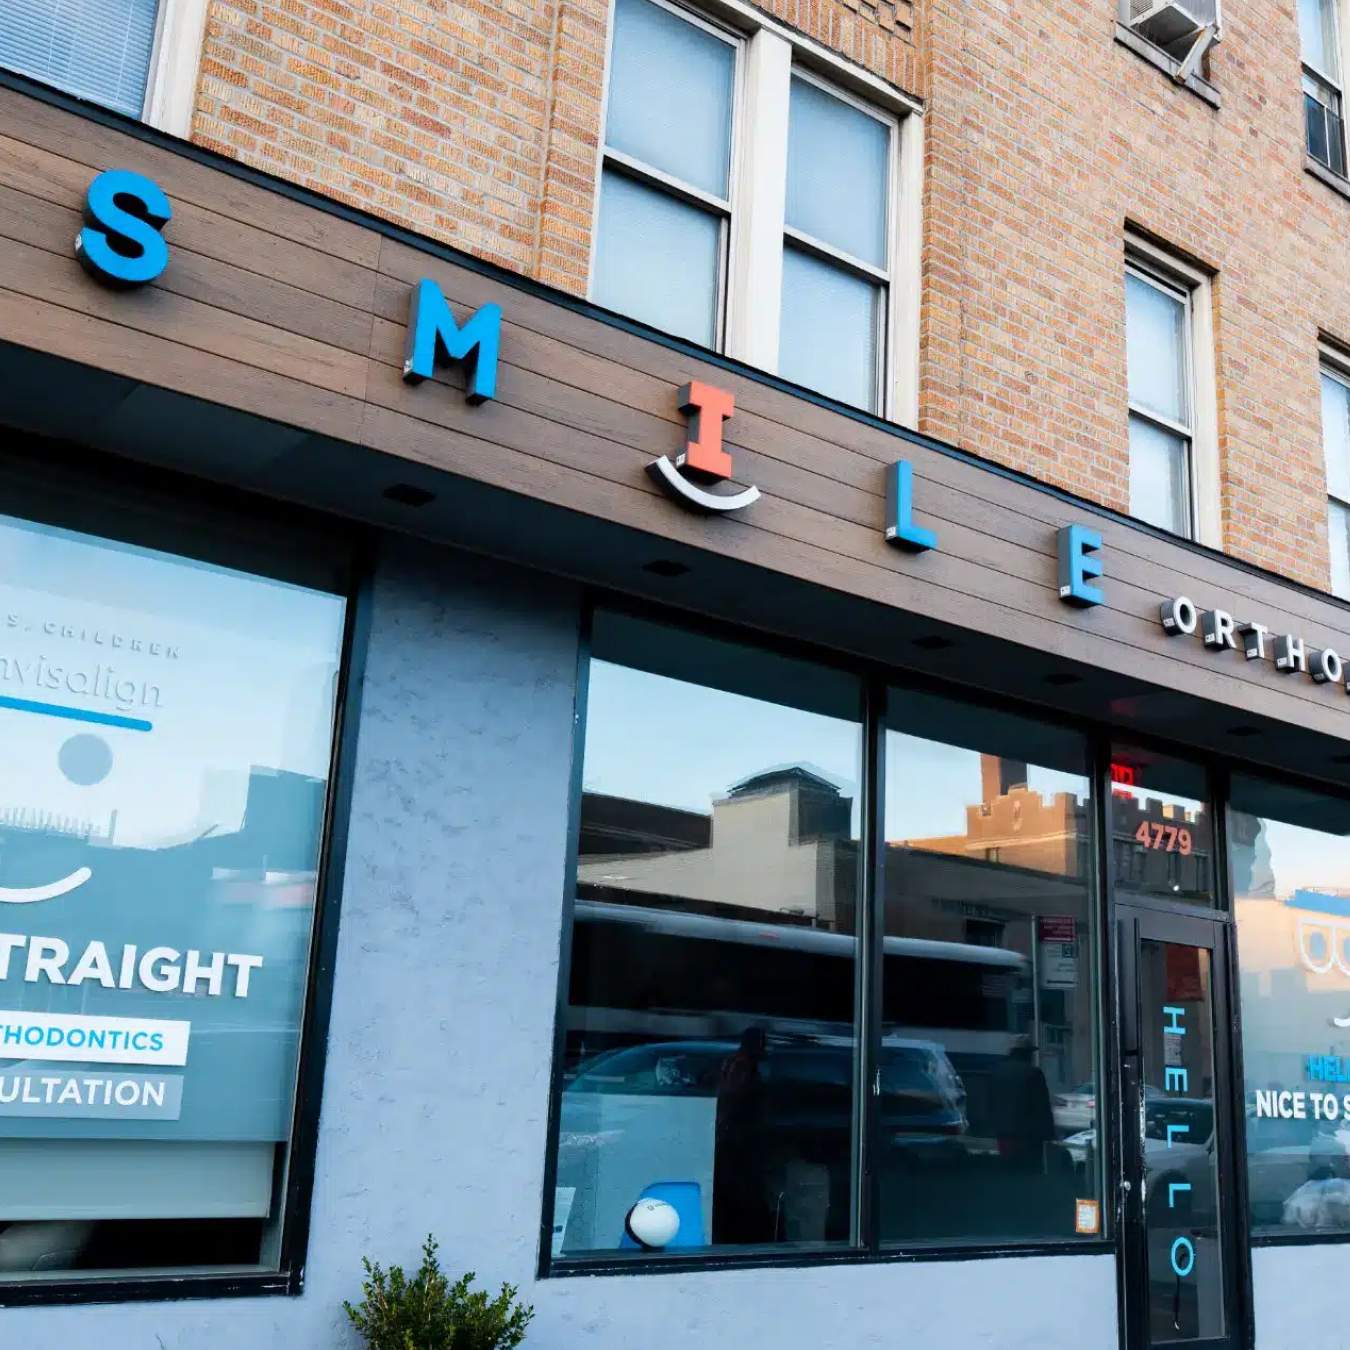 Outside view of Smile Orthodontics NY